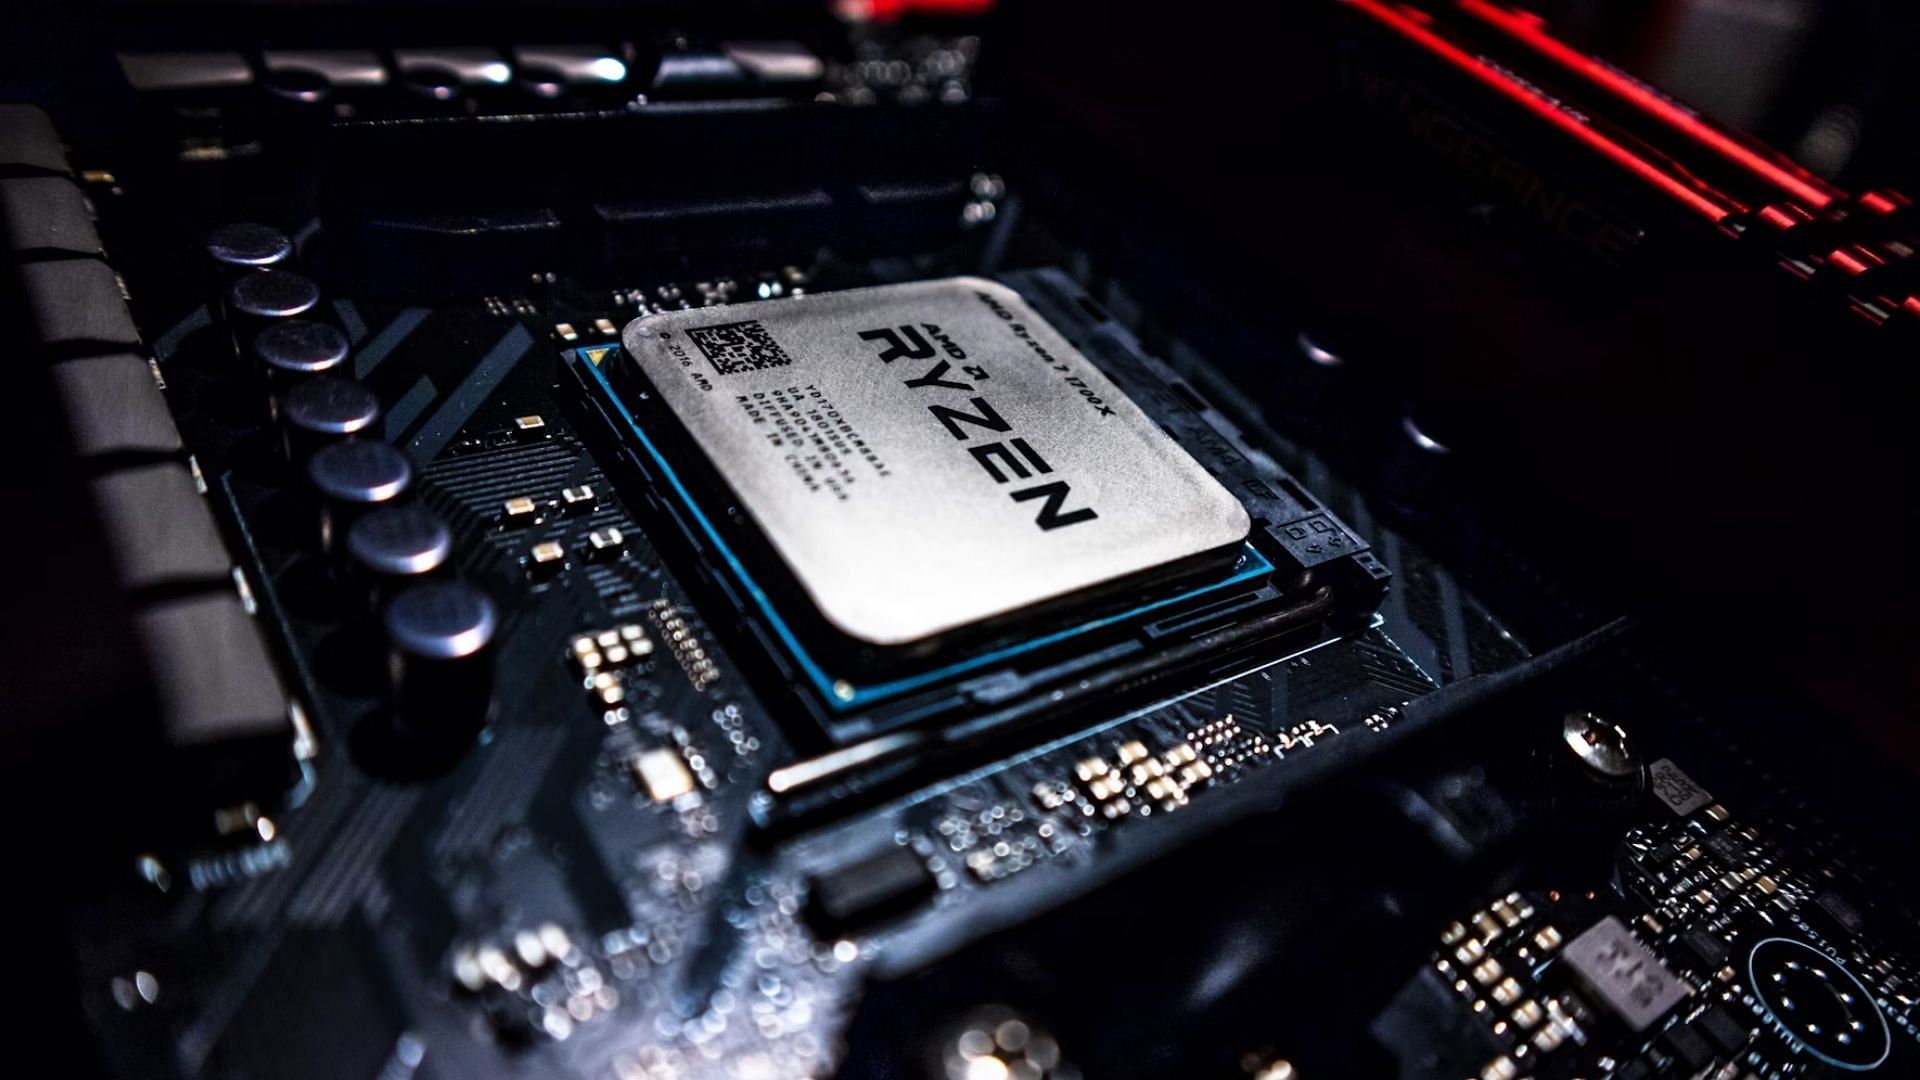 It is worth waiting for the upcoming AMD Ryzen 9000 CPUs 